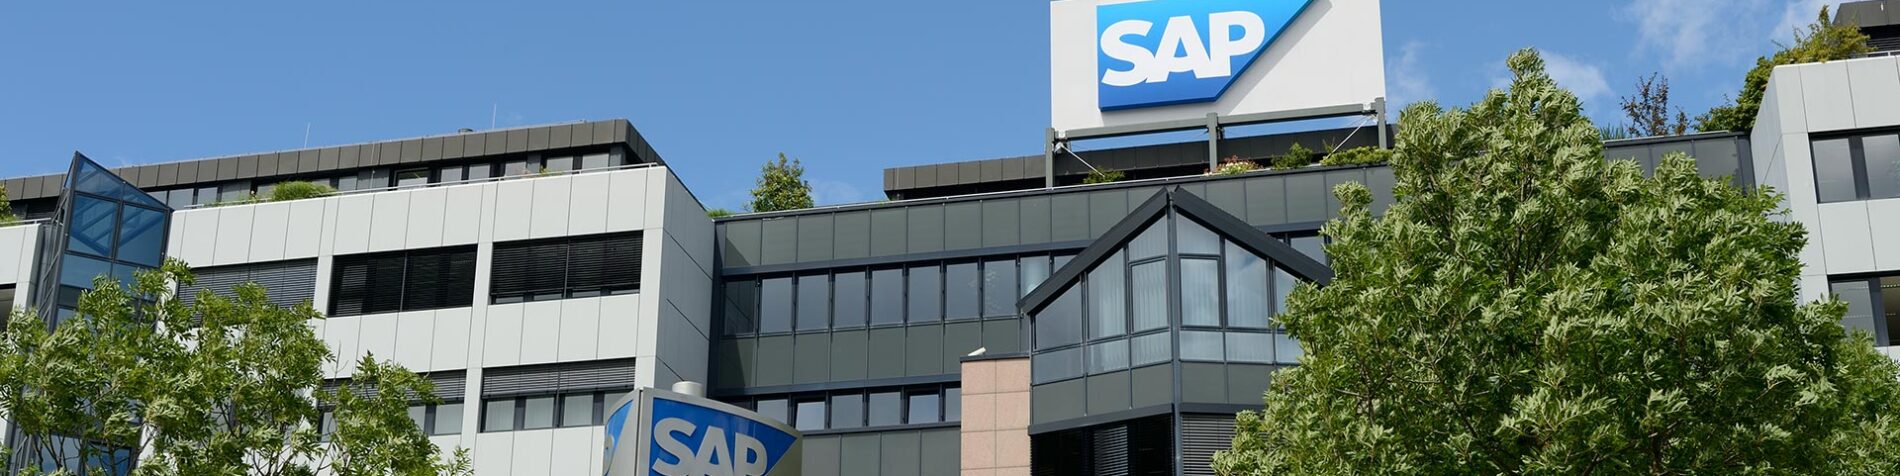 SAP Helps Small Businesses in the United Kingdom Go Digital